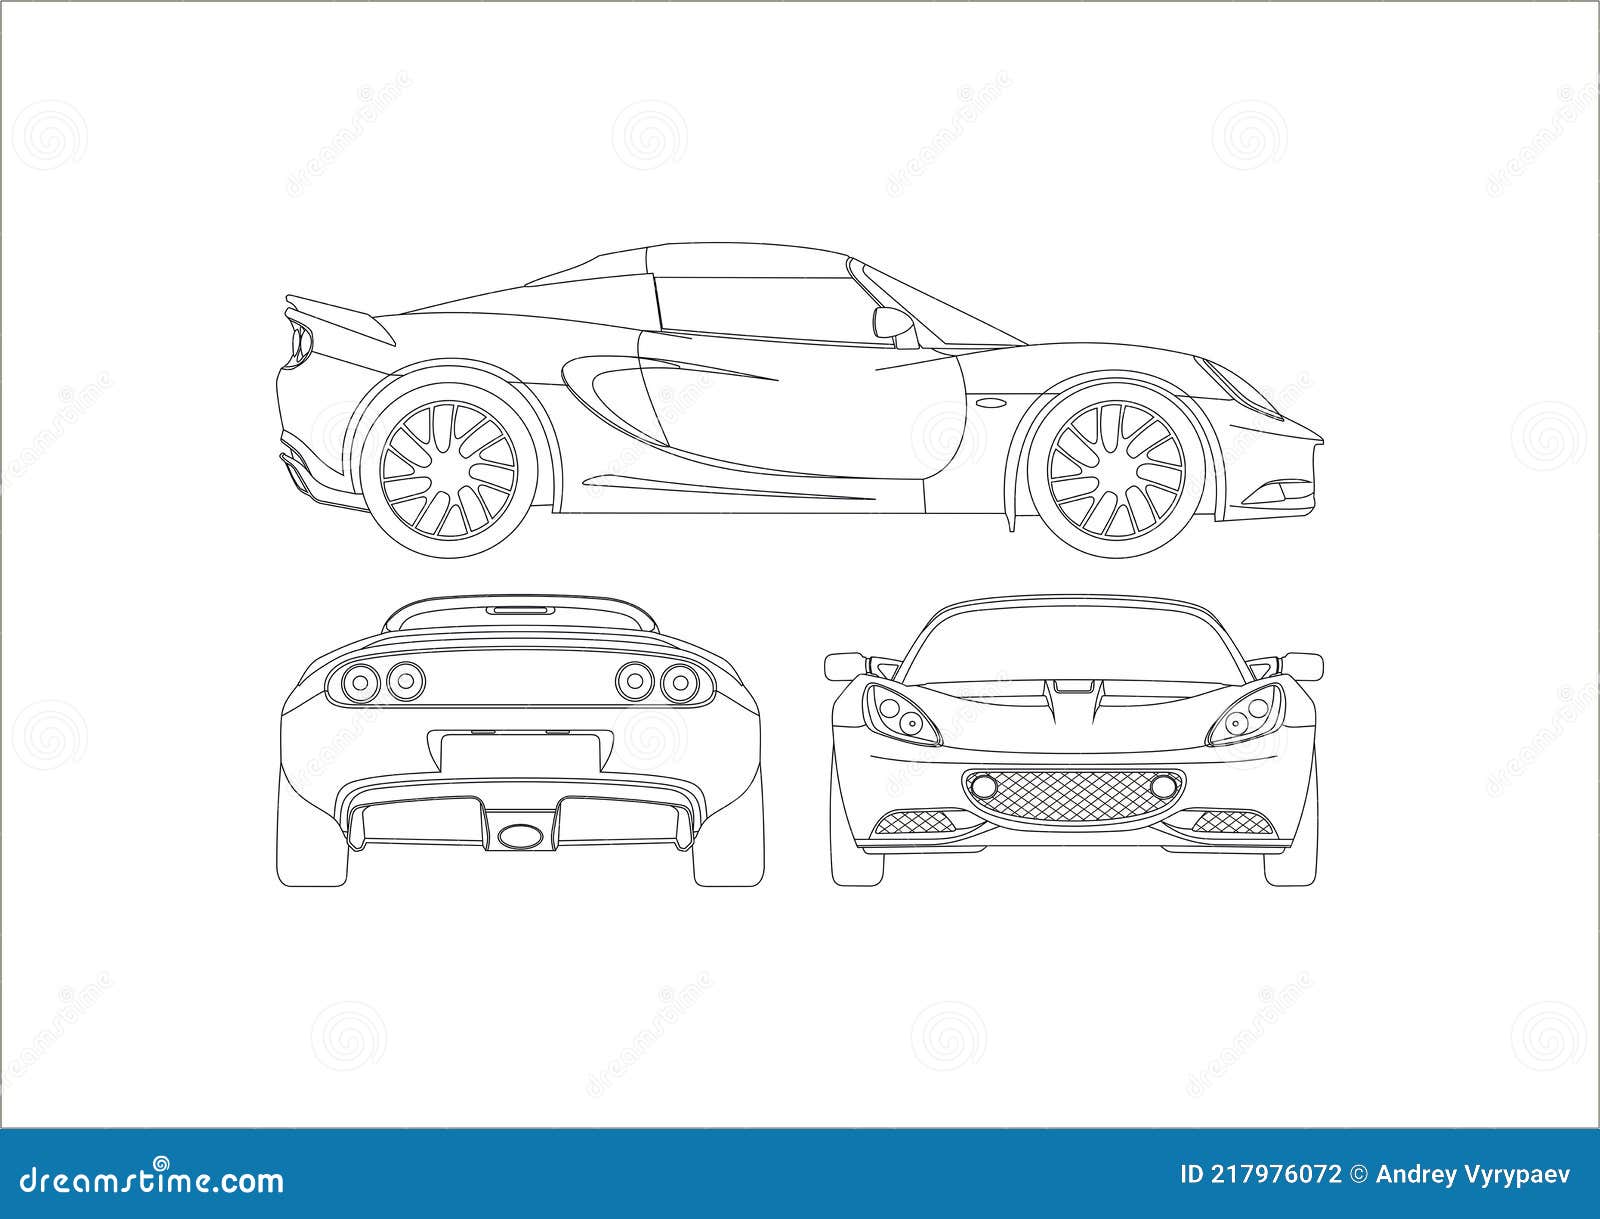 Contour Drawing of a Sports Car Stock Vector - Illustration of elise ...